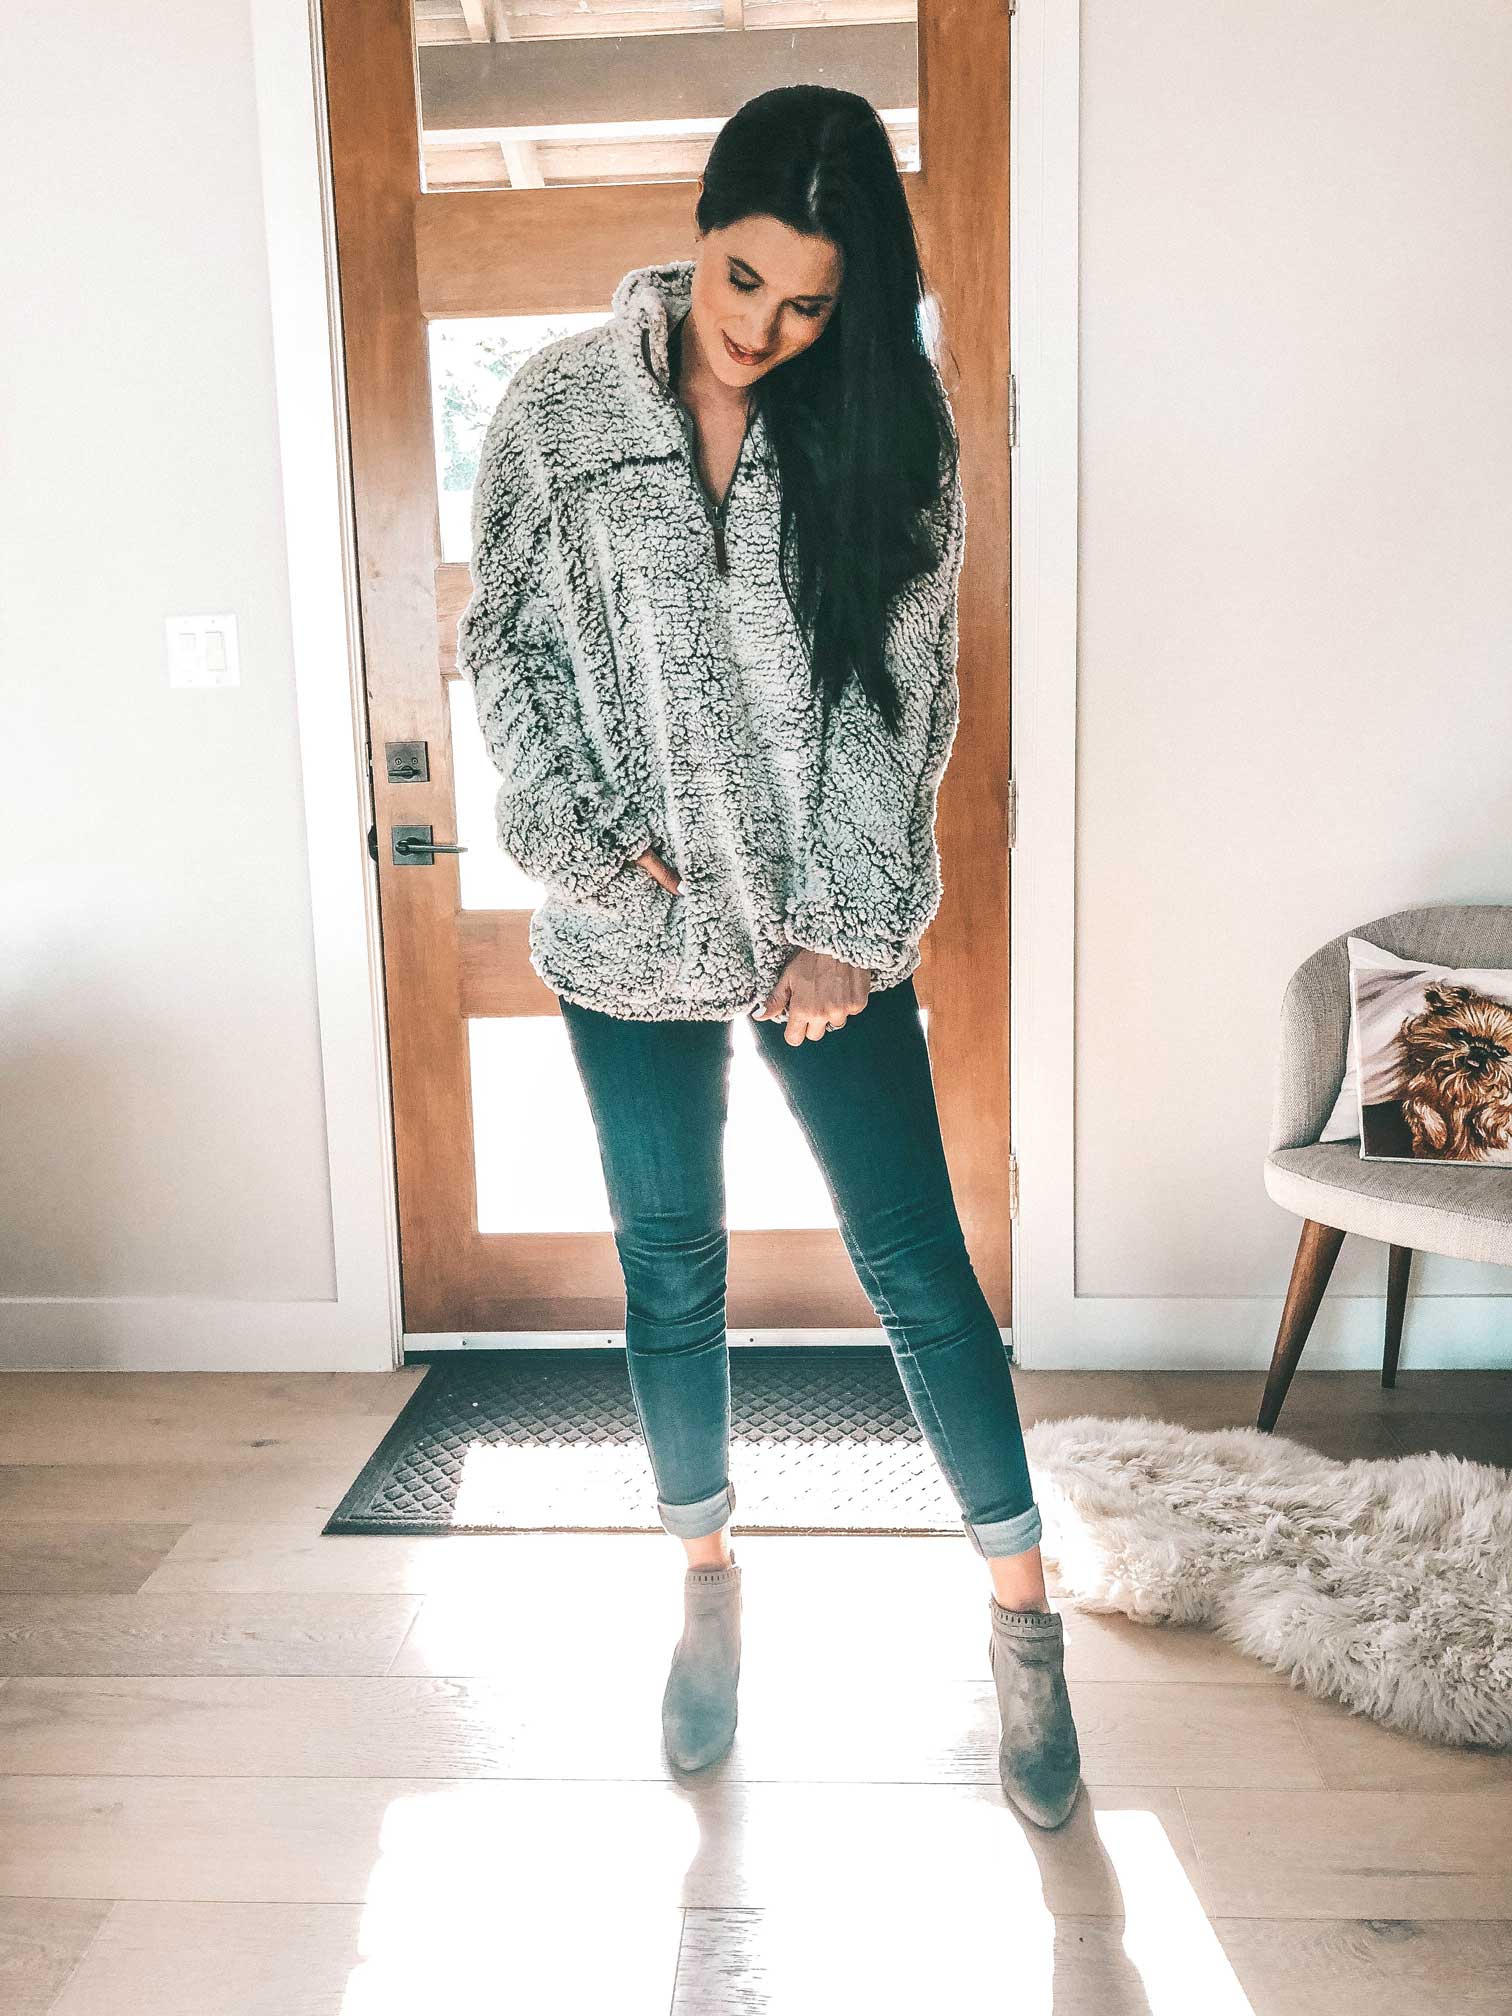 DTKAustin shares her 7 must have items from the 2018 Nordstrom Anniversary Sale NSALE. - Nordstrom Anniversary Sale Must Haves featured by popular Austin fashion blogger, Dressed to Kill || DTK Austin #nsale #nordstrom #anniversarysale #nordstromsale #fashion #style #fallstyle #winterstyle #womensoutfits #dtkaustin